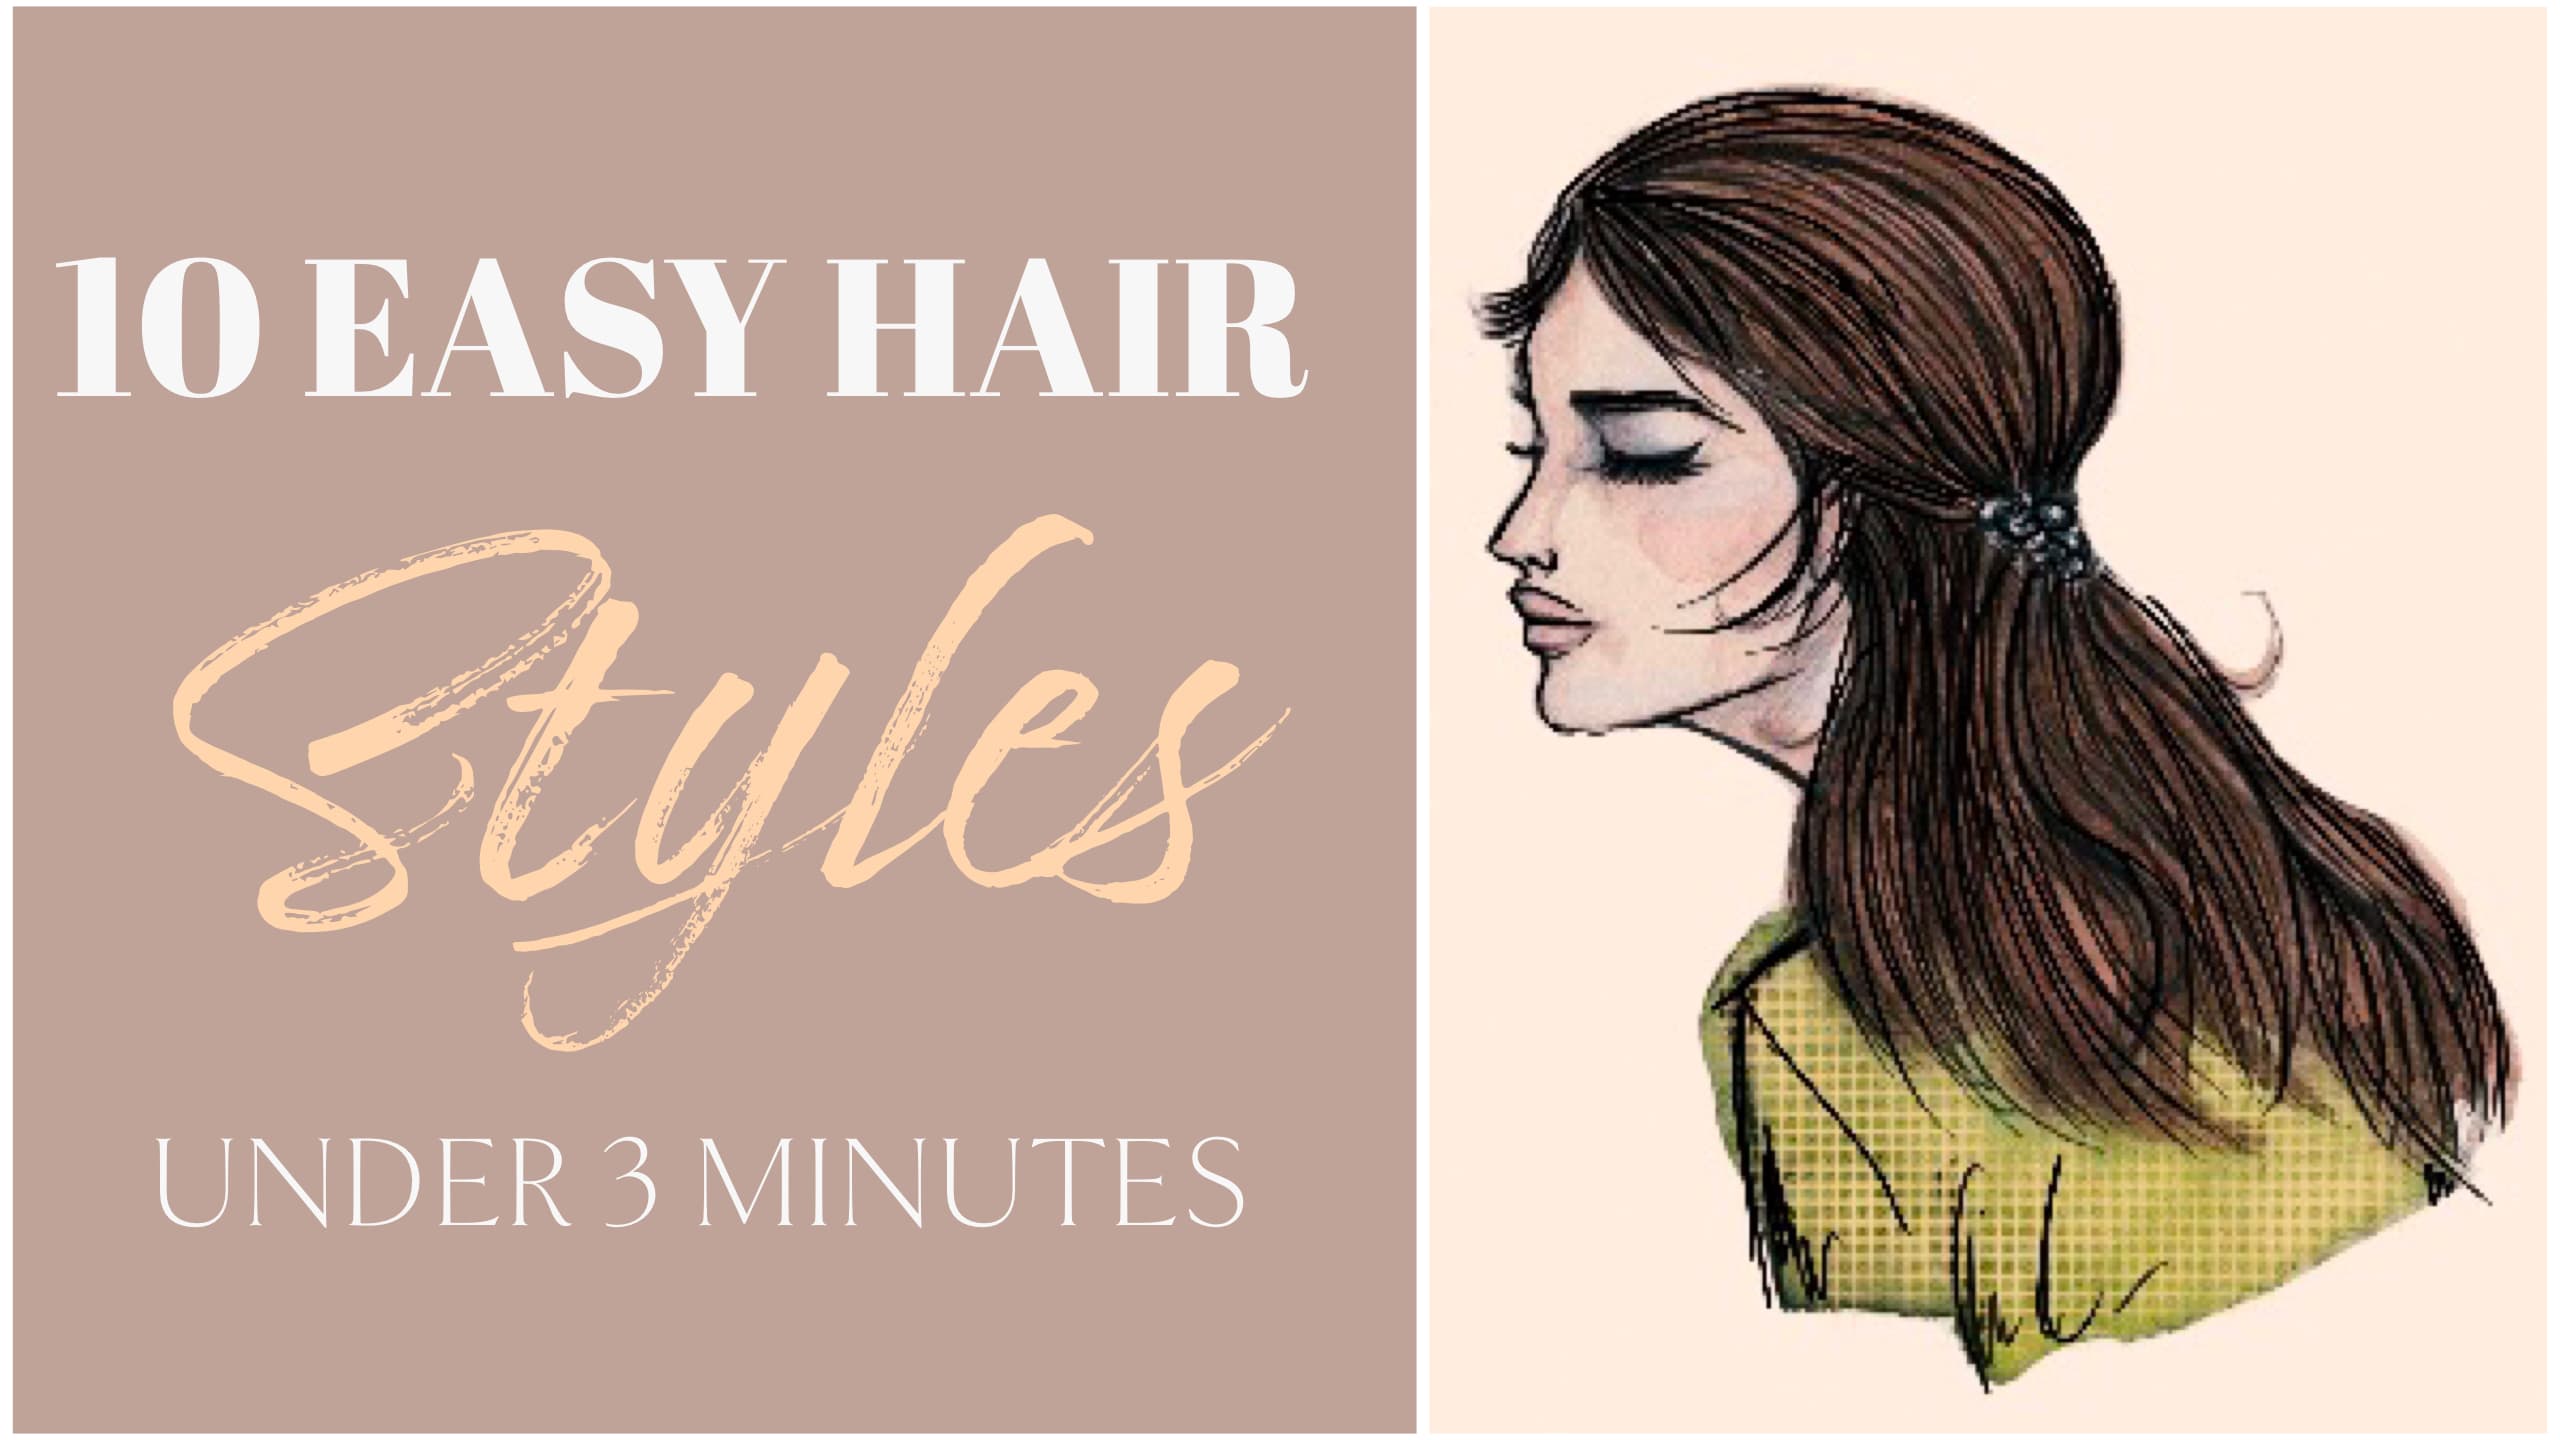 3 Party Hairstyles - YouTube